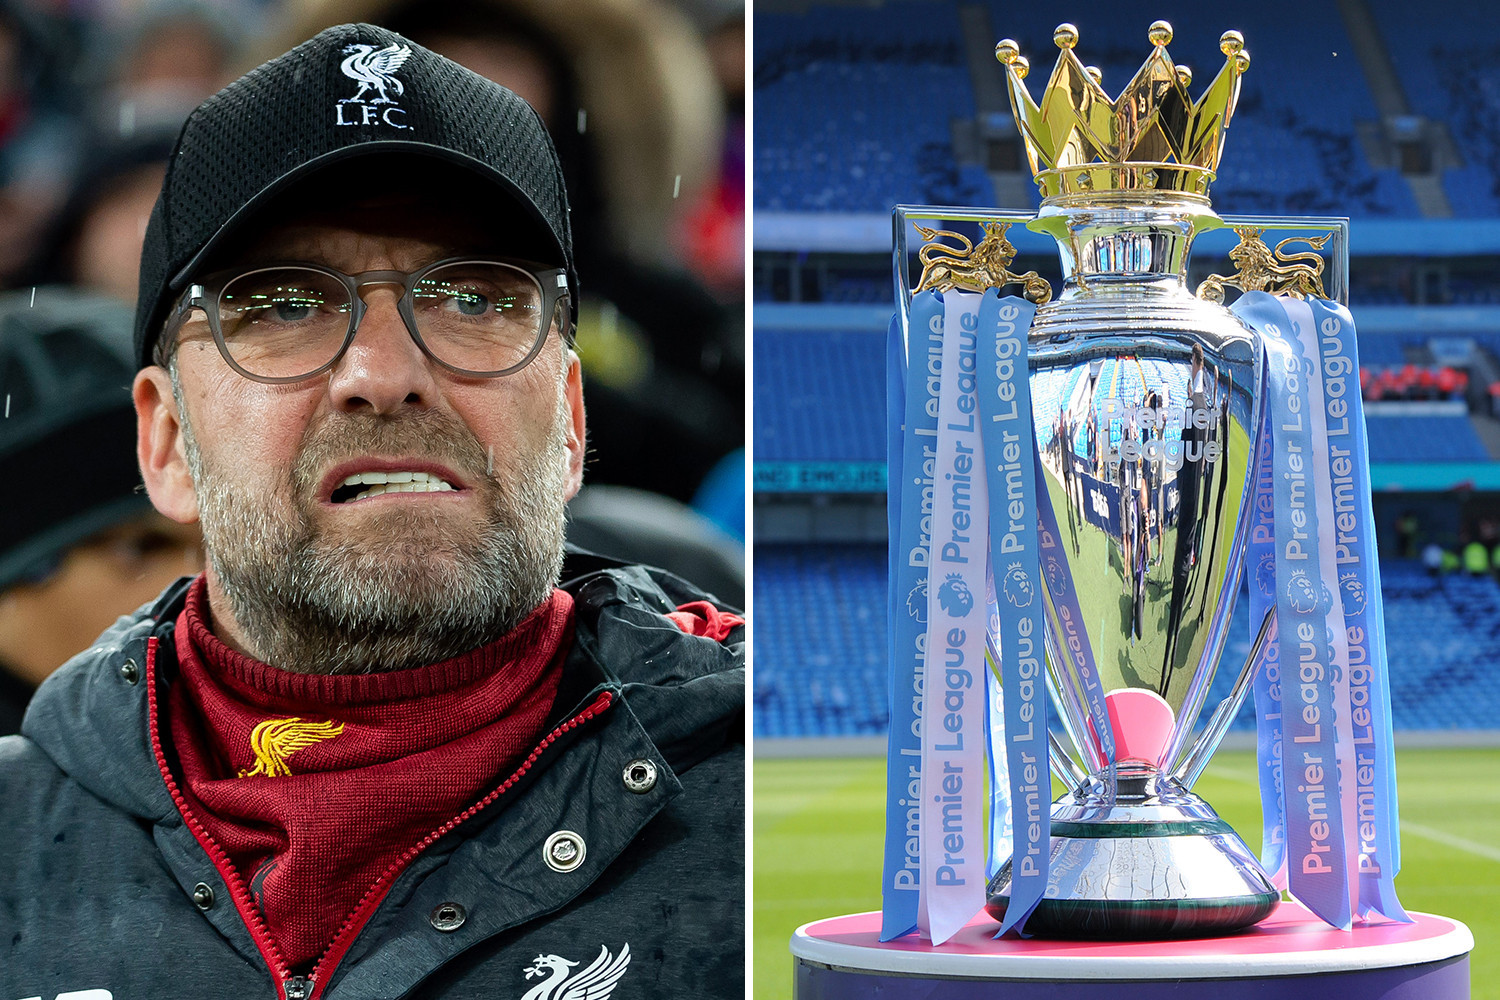 Liverpool and the rest of the Premier League clubs could miss out on more than £400m of prize money